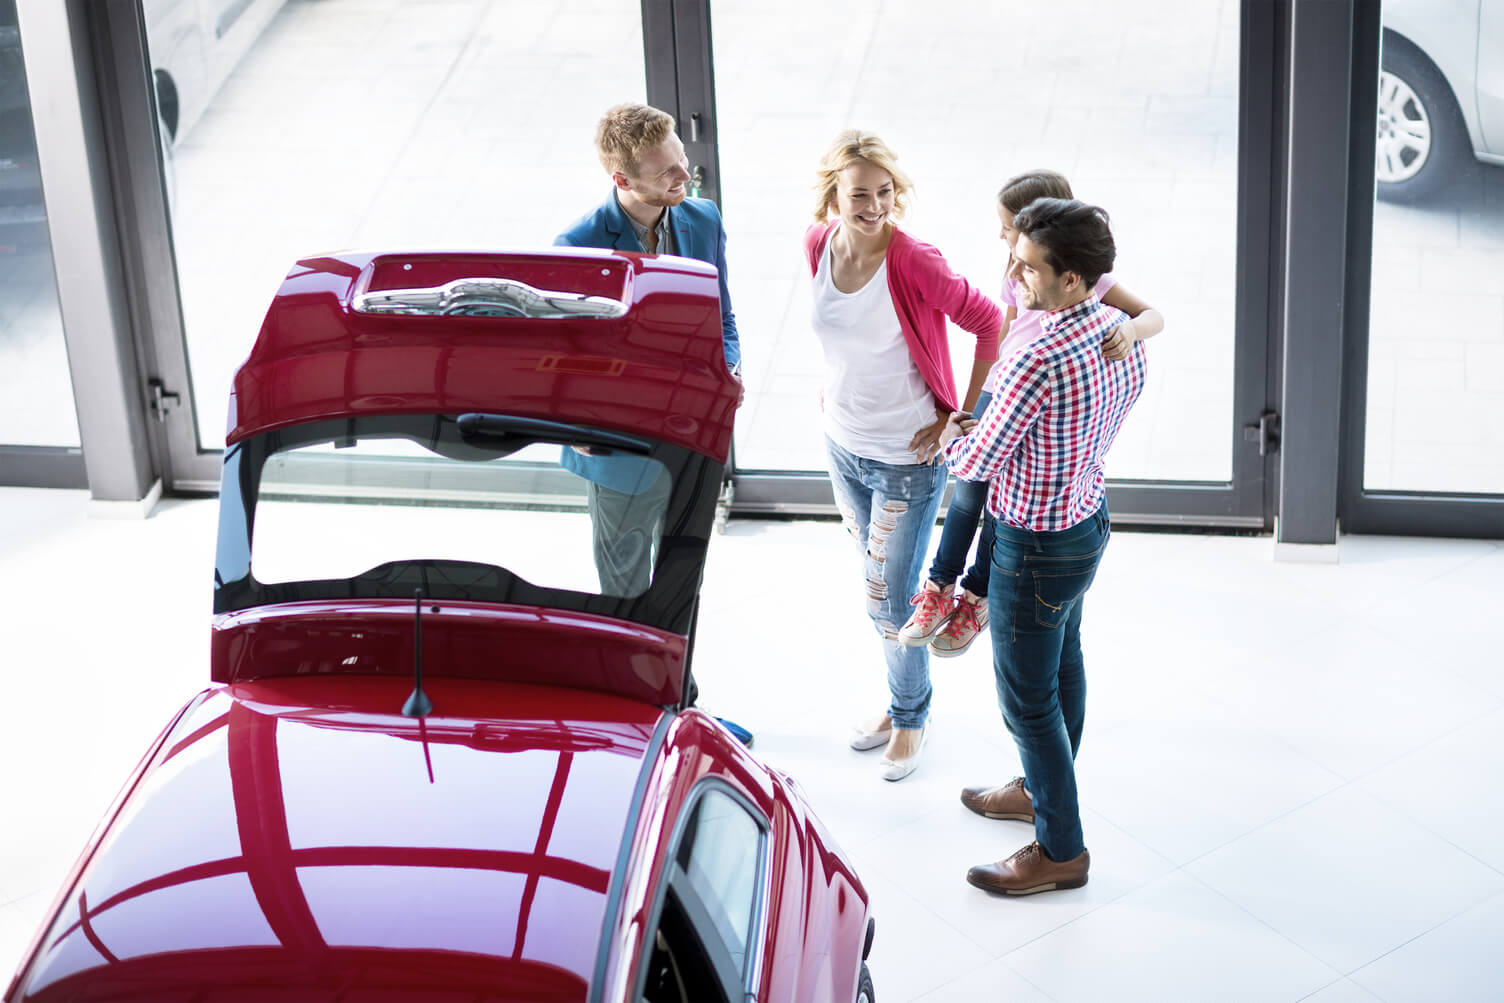 Three people admiring the the carrying capacity of a car on the showroom floor.